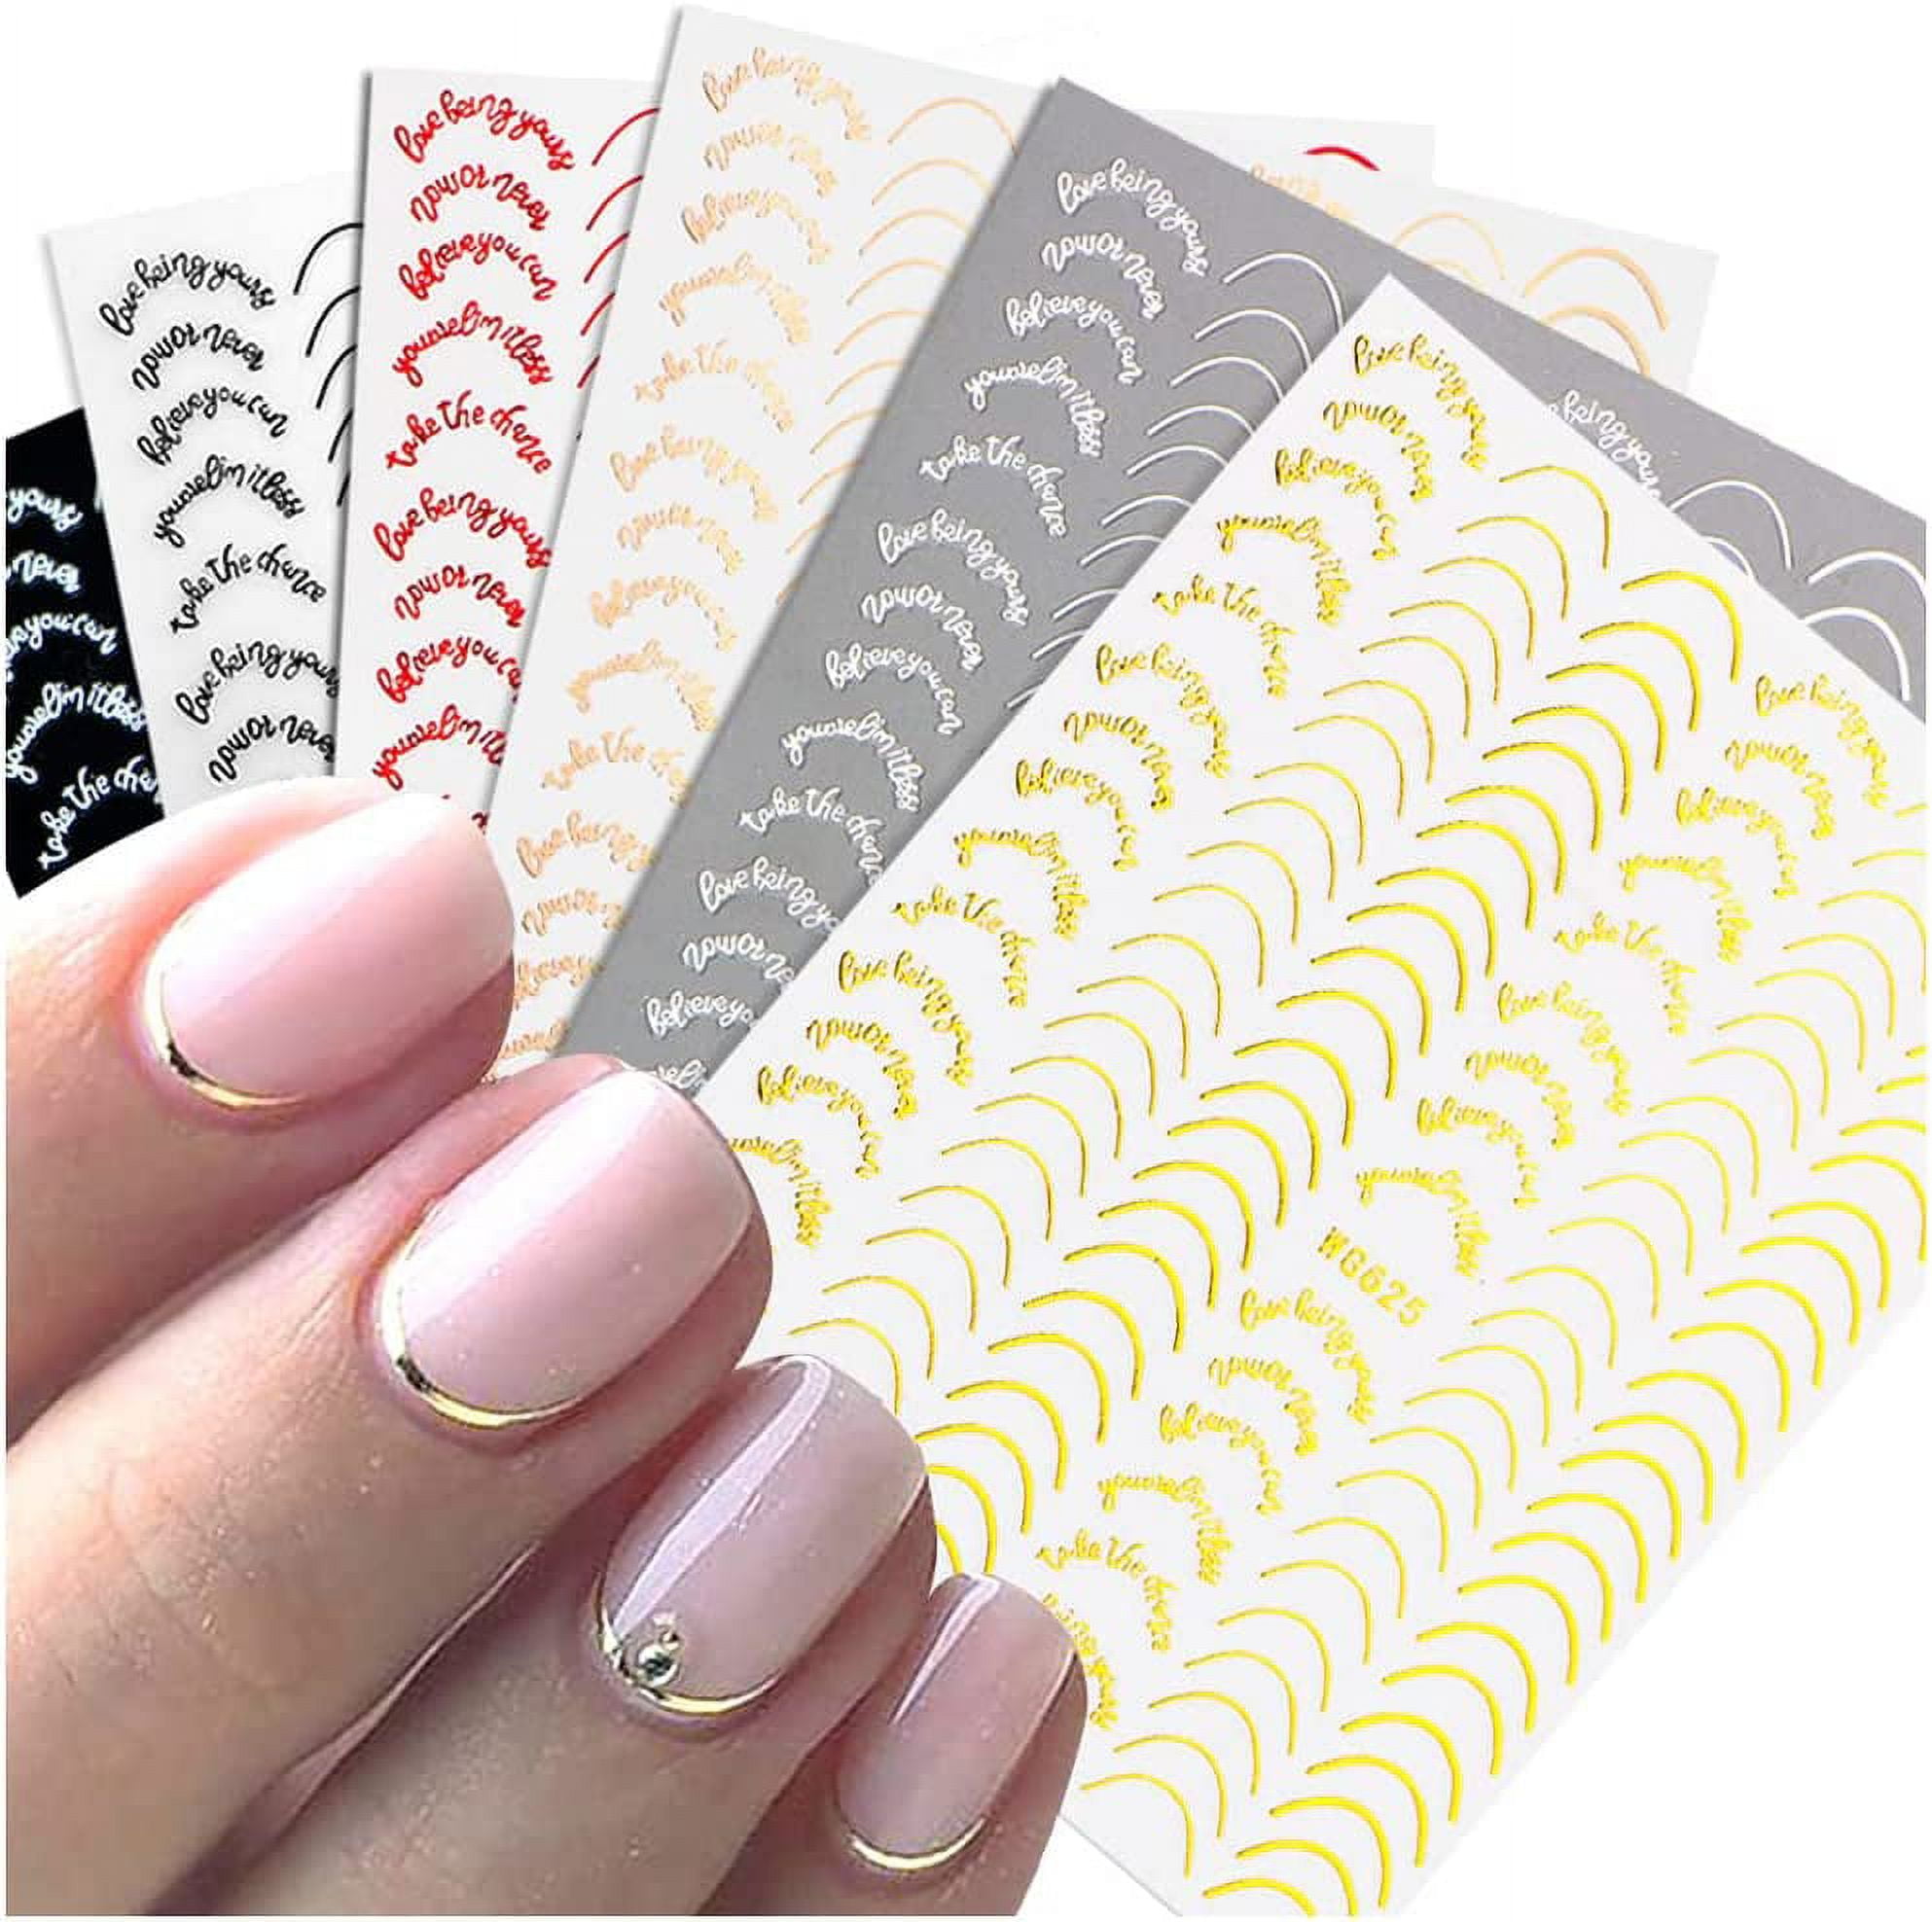 How To Striping Tape With A Twist - Paola Ponce Nails